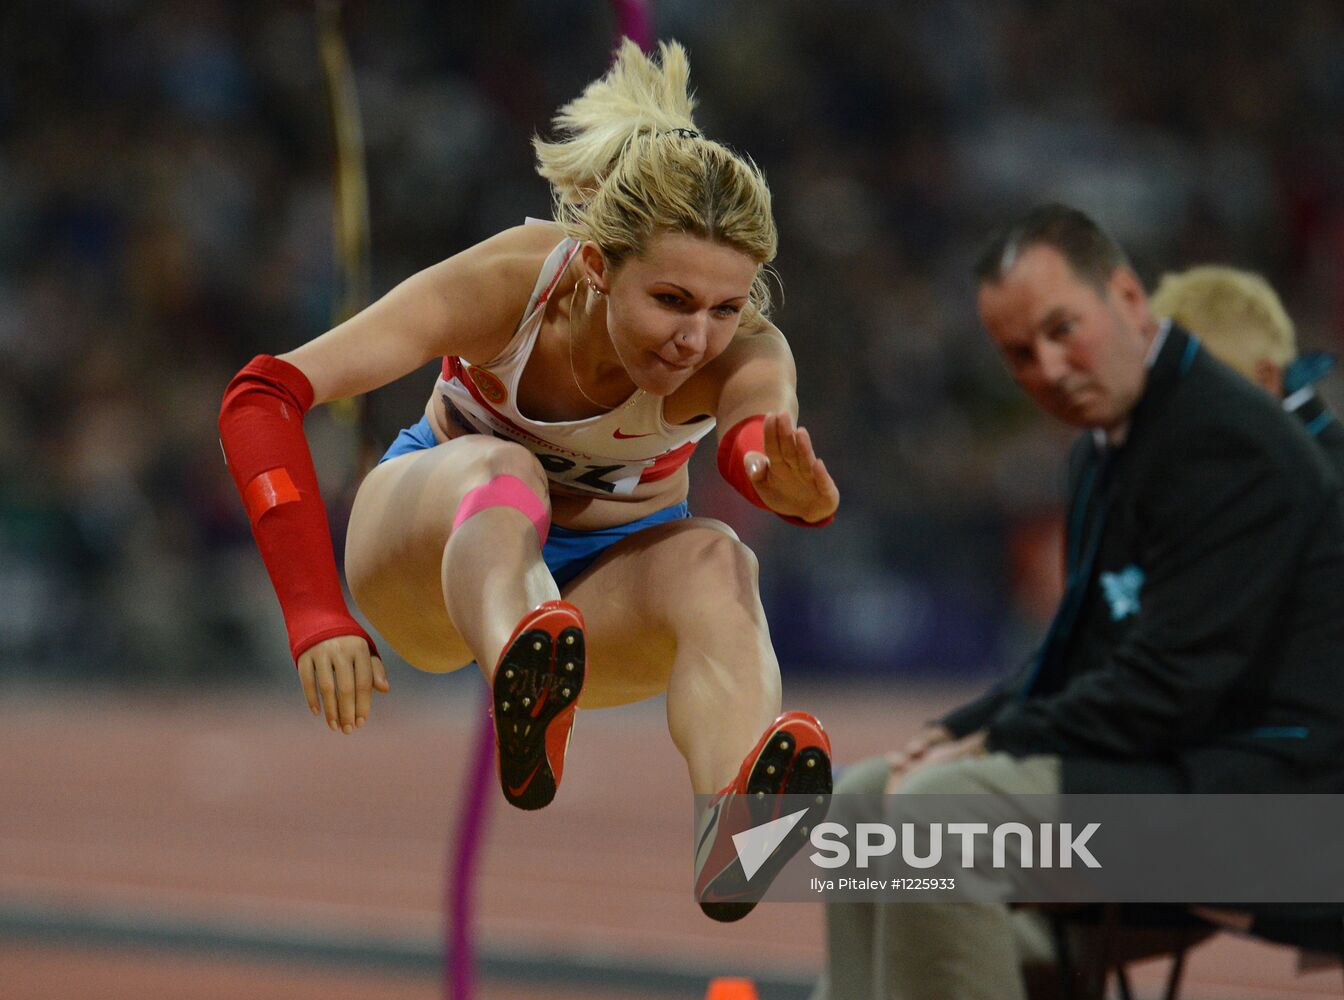 2012 Summer Paralympics. Track and field